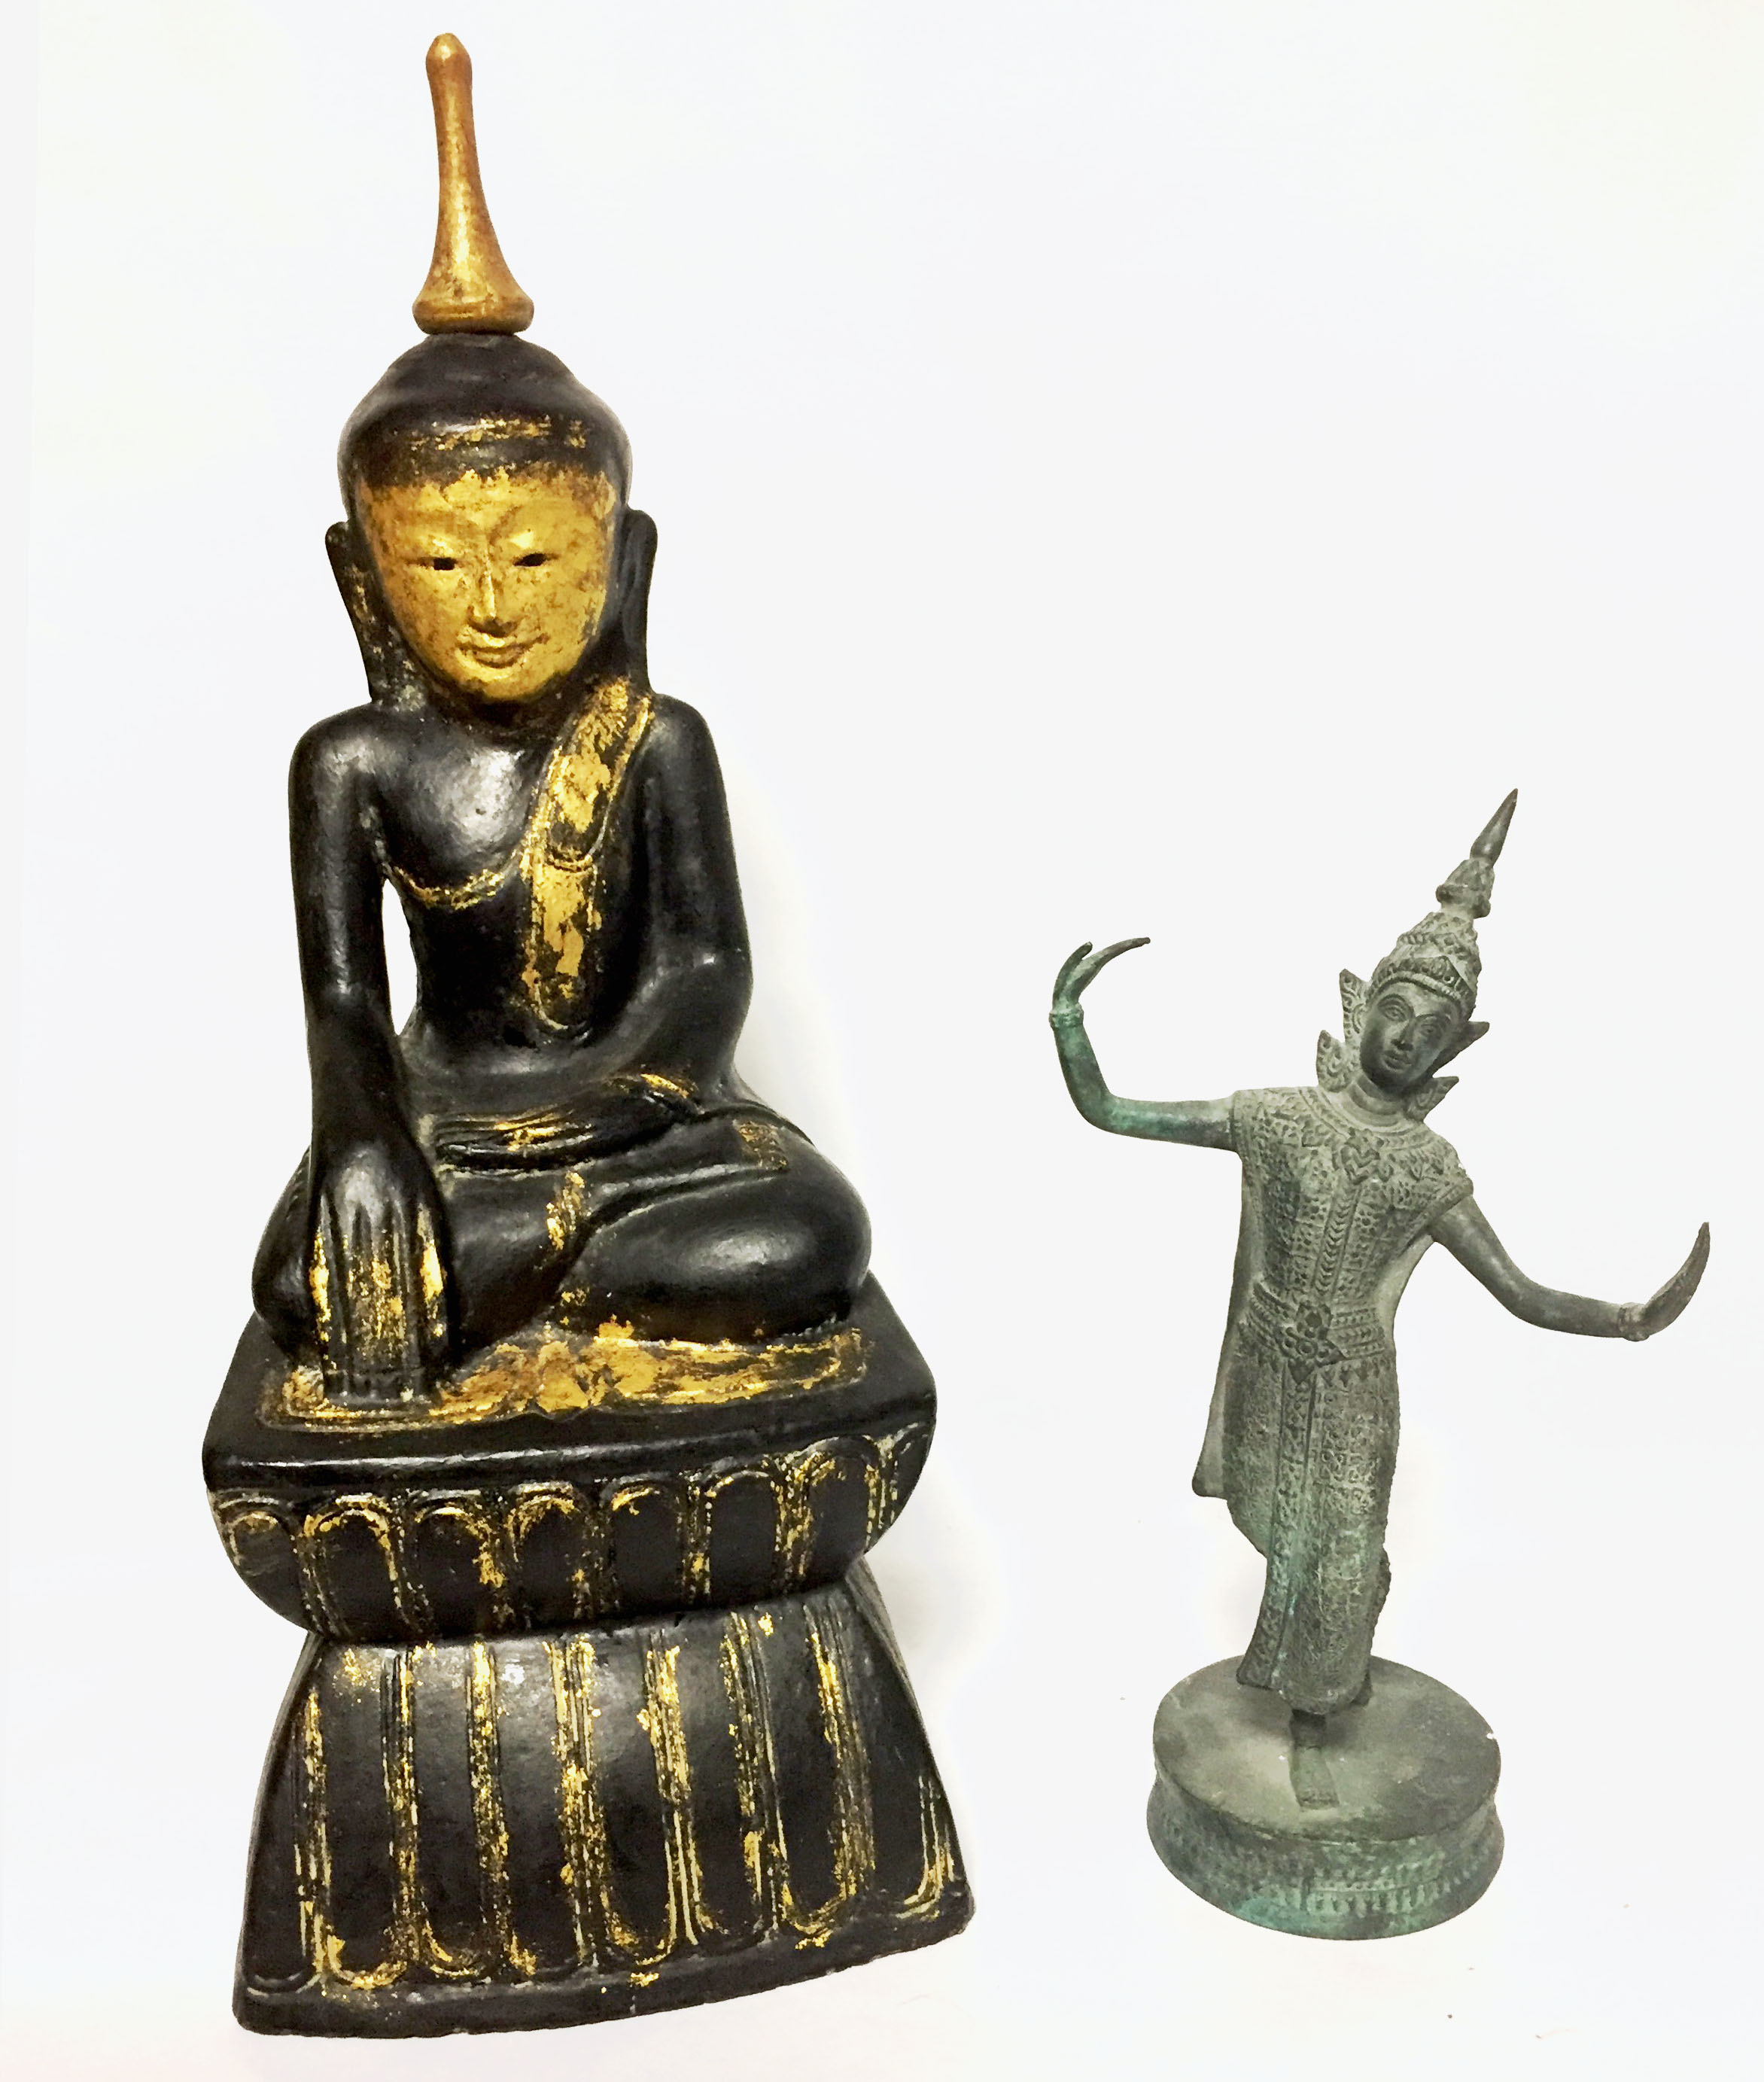 A PATINATED BRONZE STATUE OF A THAI DANCER Raised on a circular plinth base, sold together with